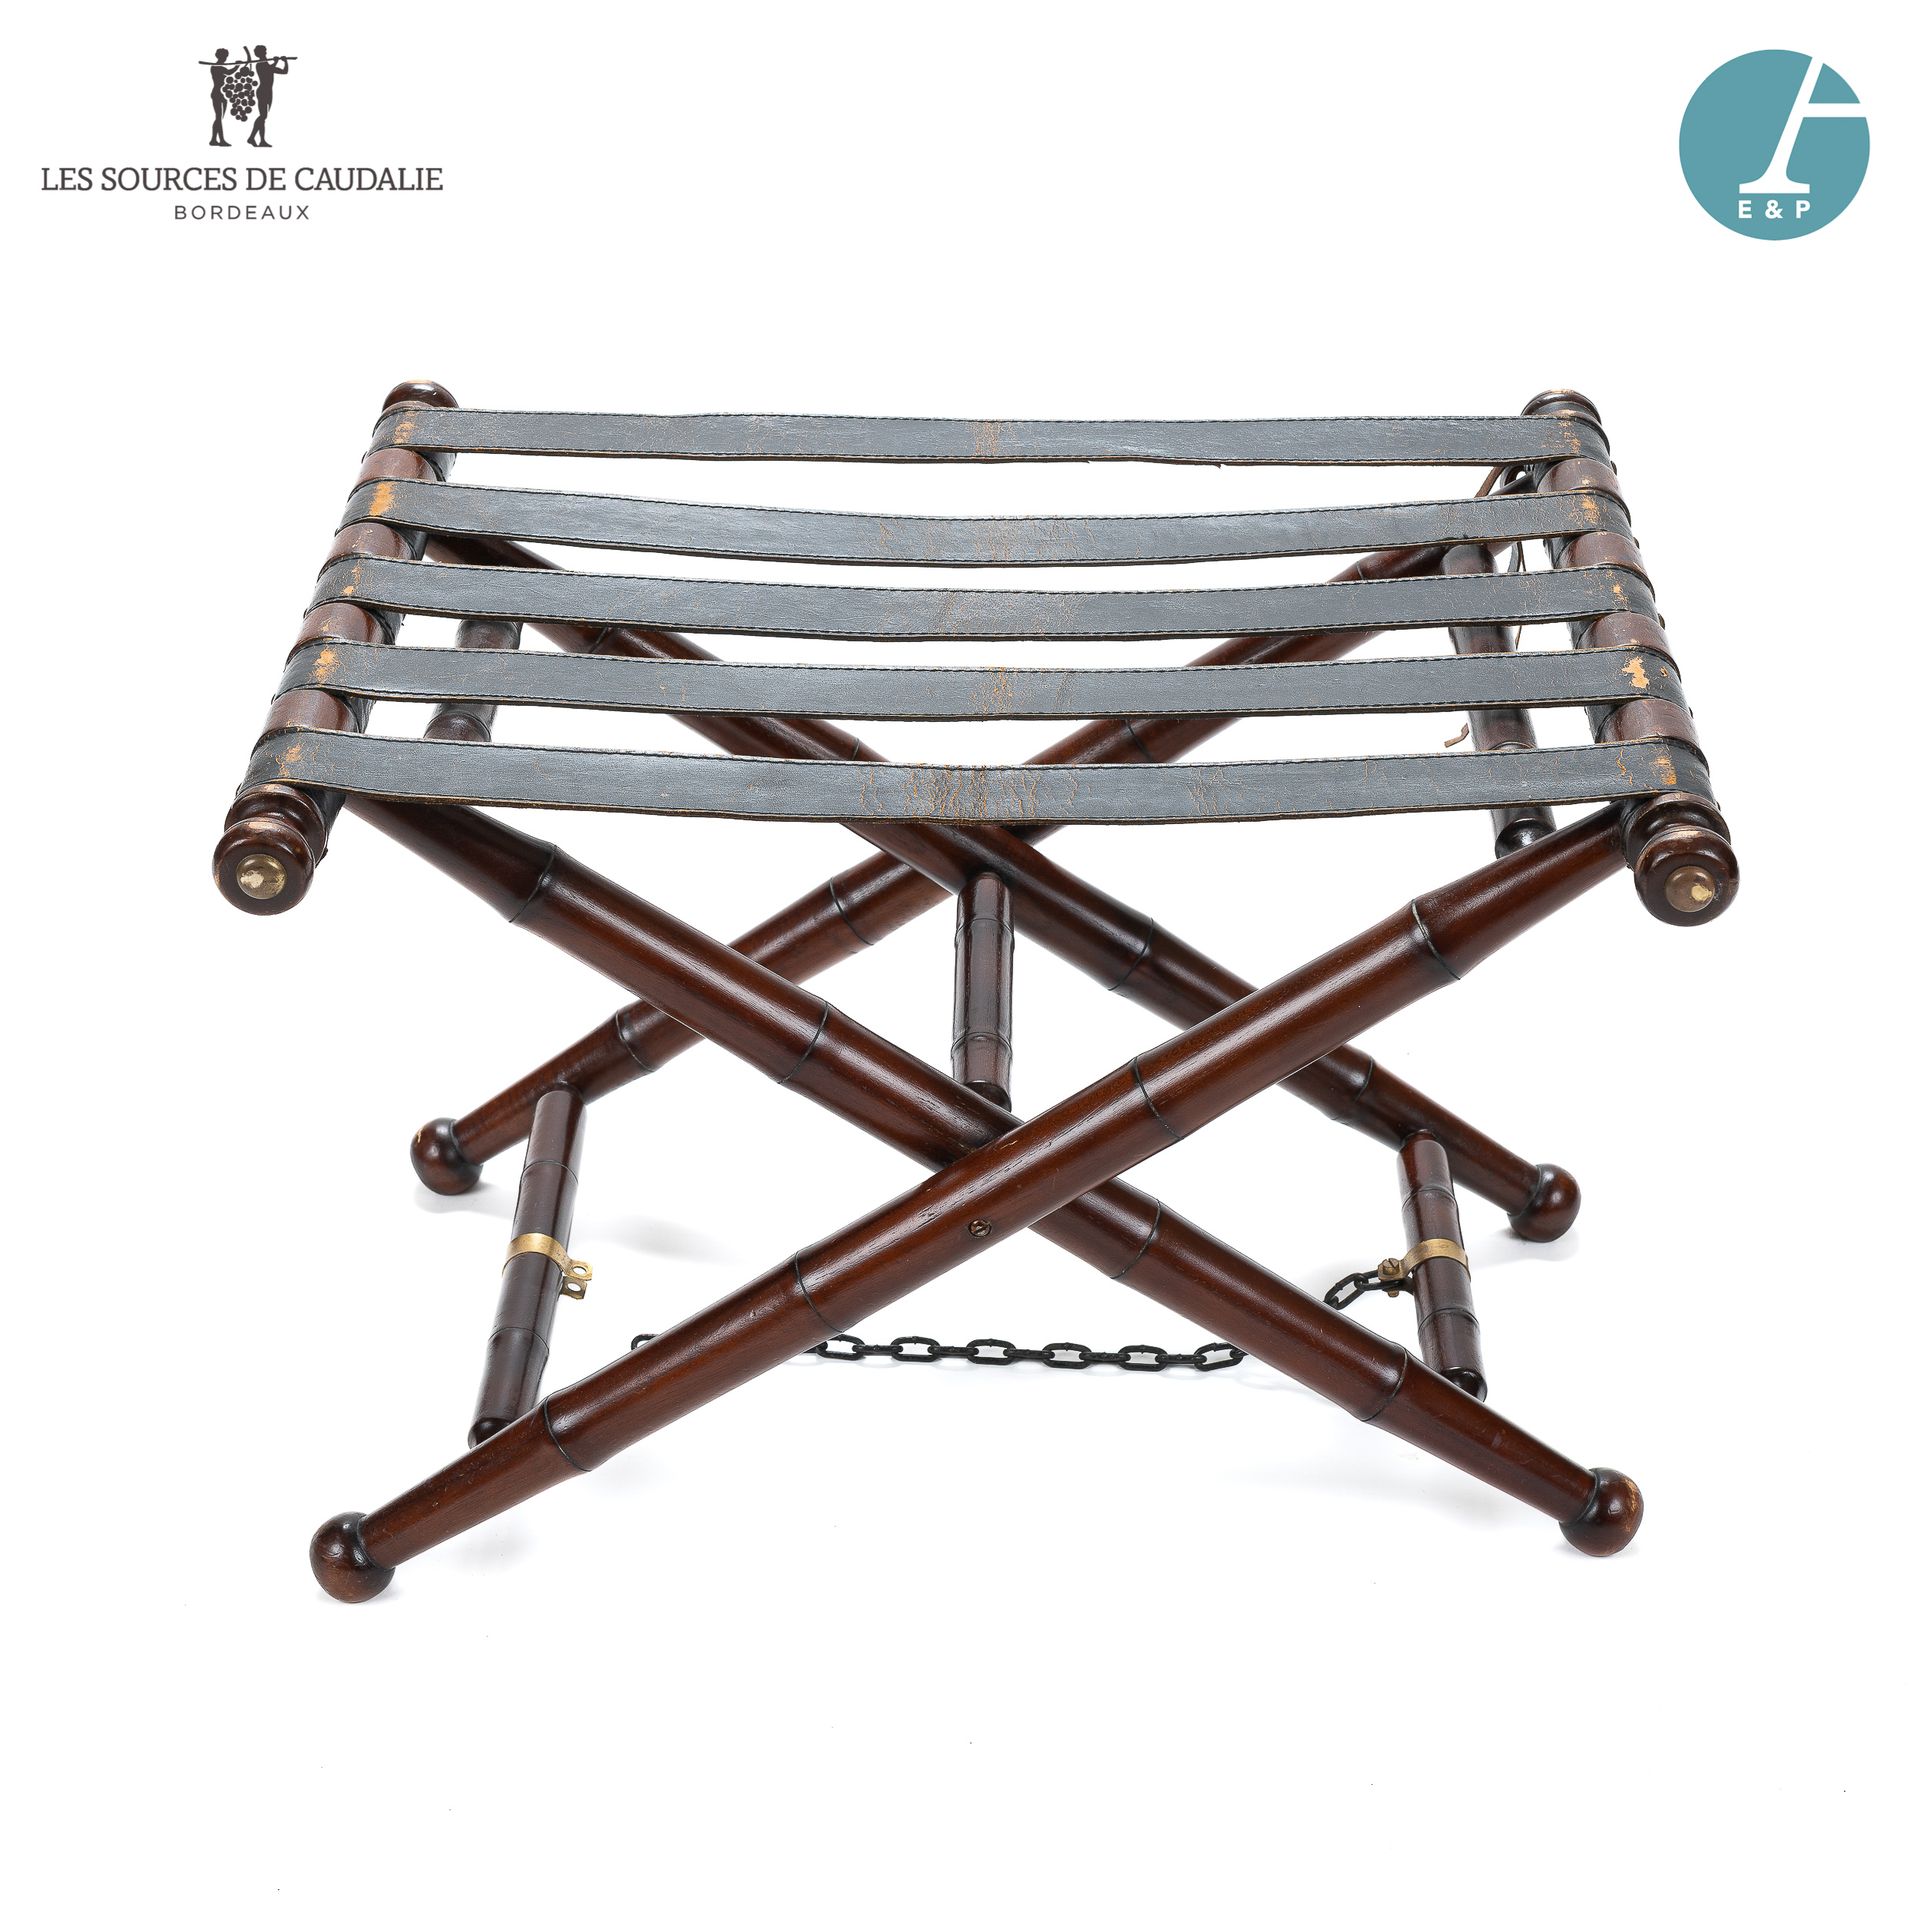 Null From Room n°1 "L'Etiquette

Mahogany stained wood folding luggage rack, bla&hellip;